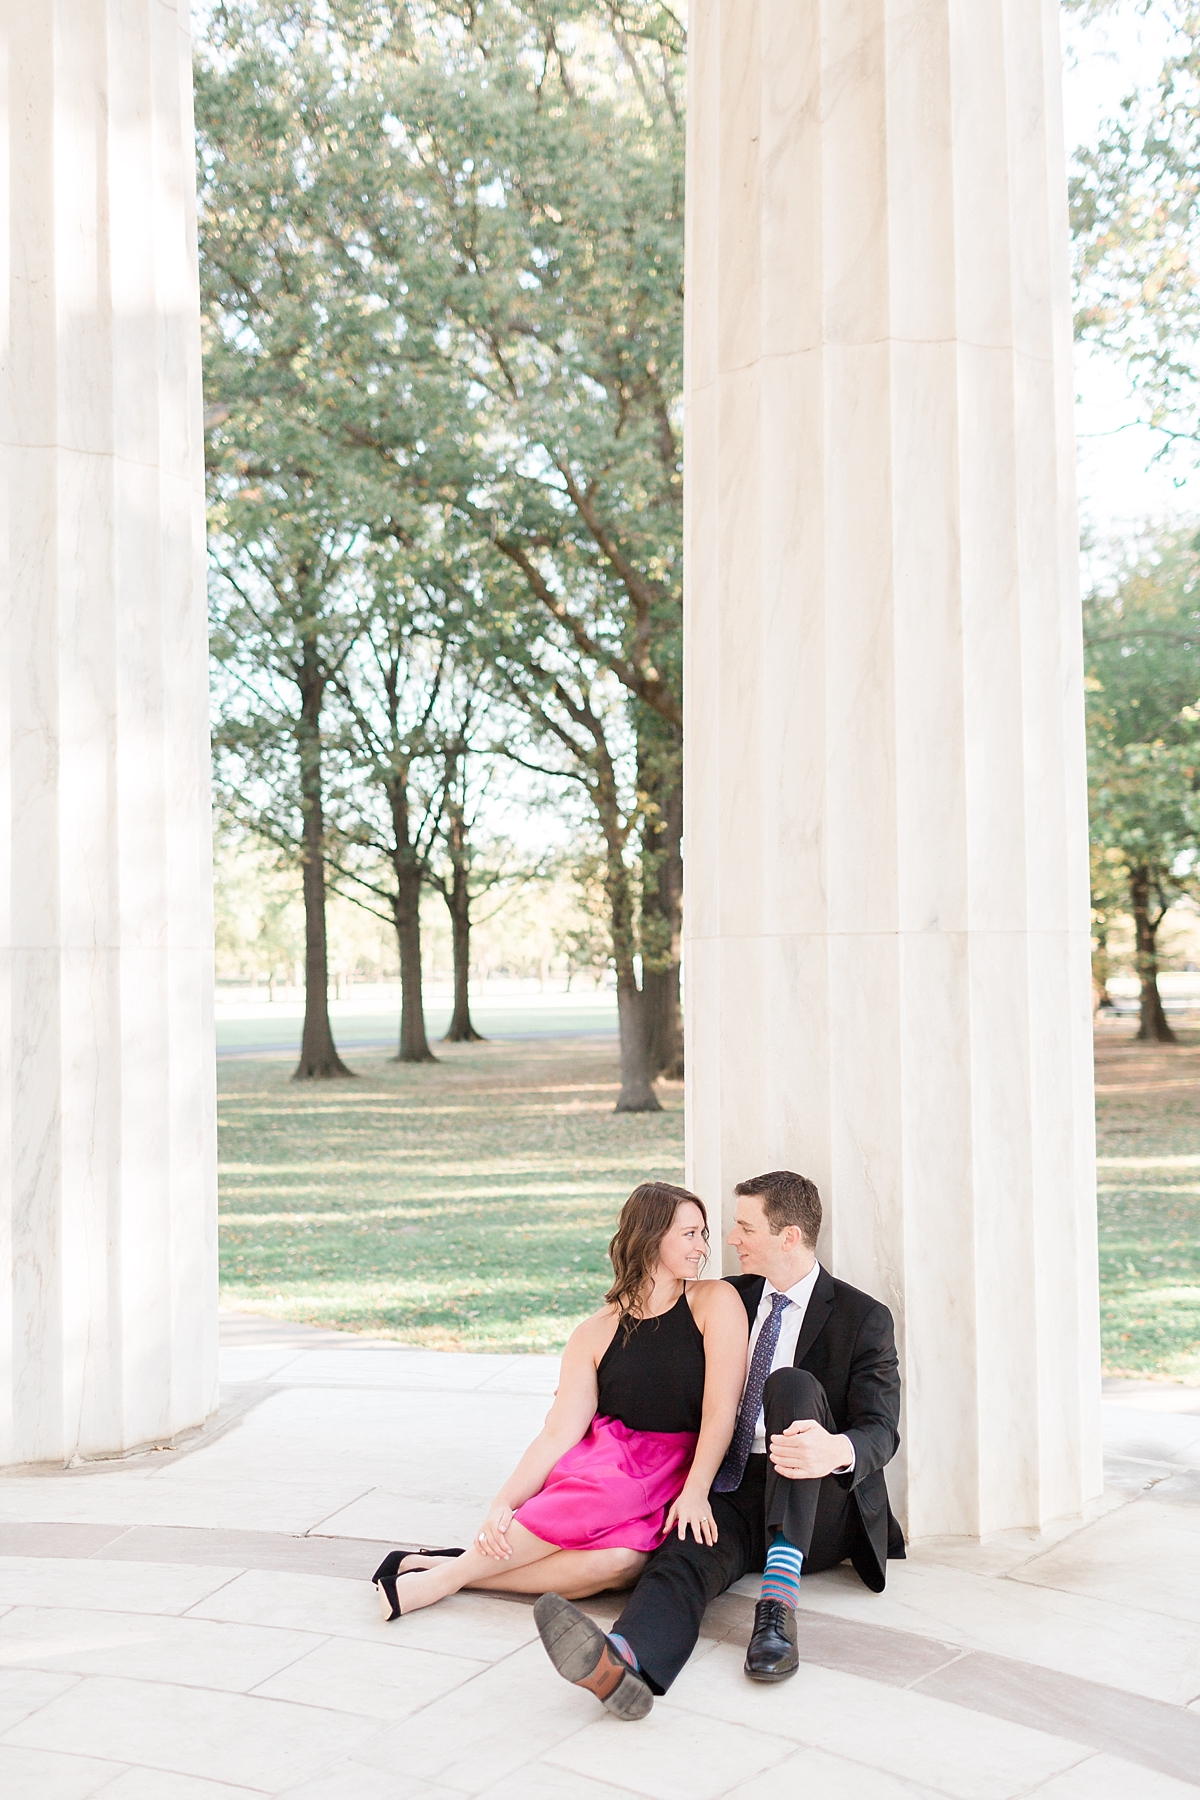 A beautiful set of fall engagement photos at the Lincoln Memorial, DC War Memorial, and National Mall photographed by Washington, DC photographer, Alicia Lacey.